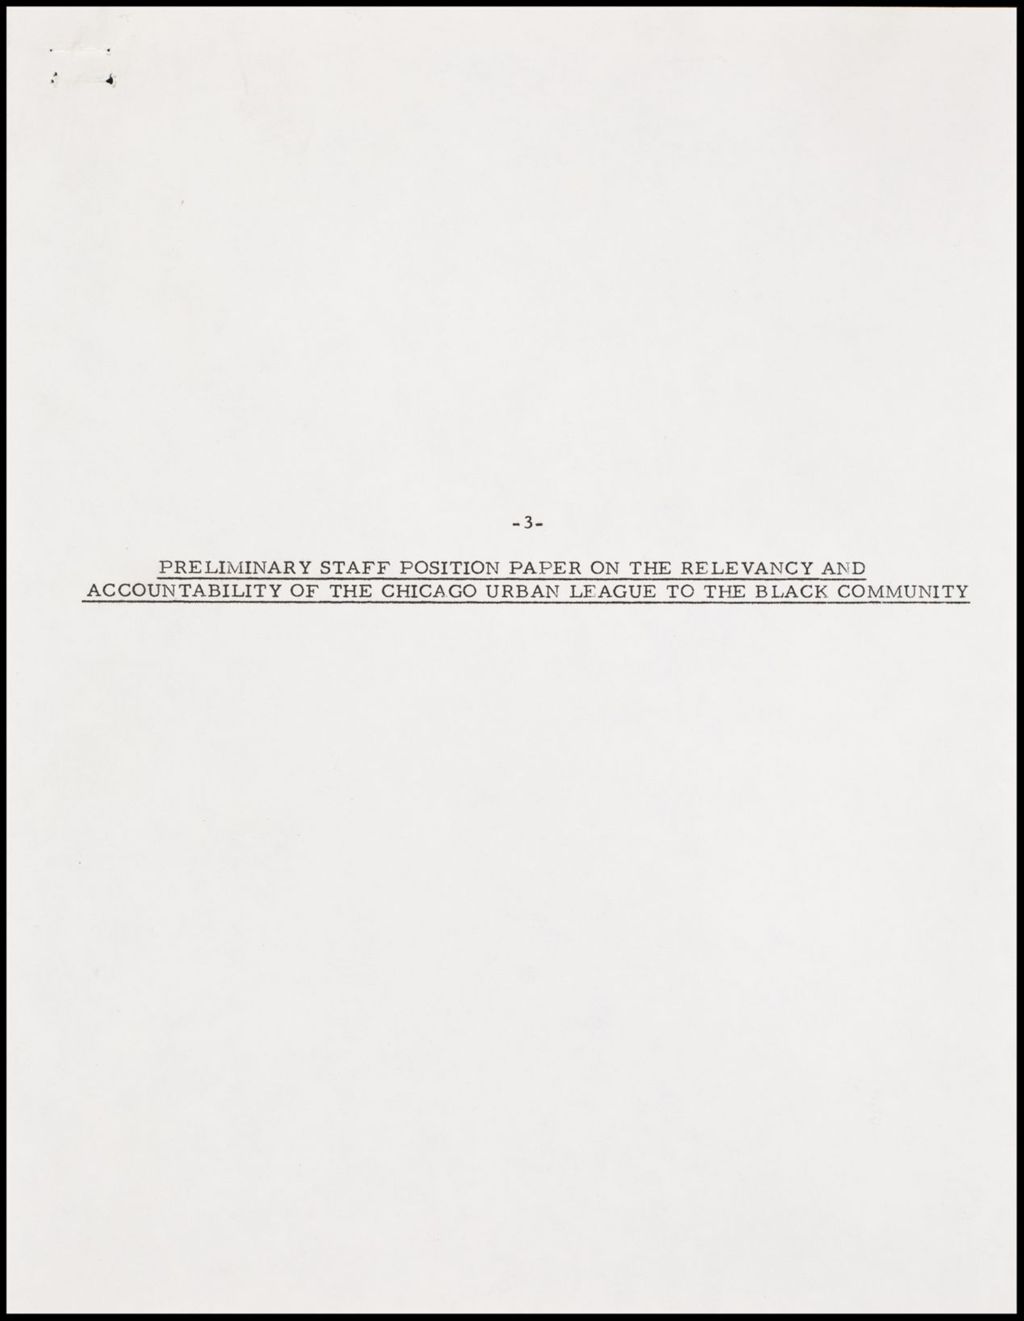 Miniature of Preliminary Staff Position Paper on the Relevancy and Accountability of the CUL to the Black Community, 1968 (Folder IV-696)